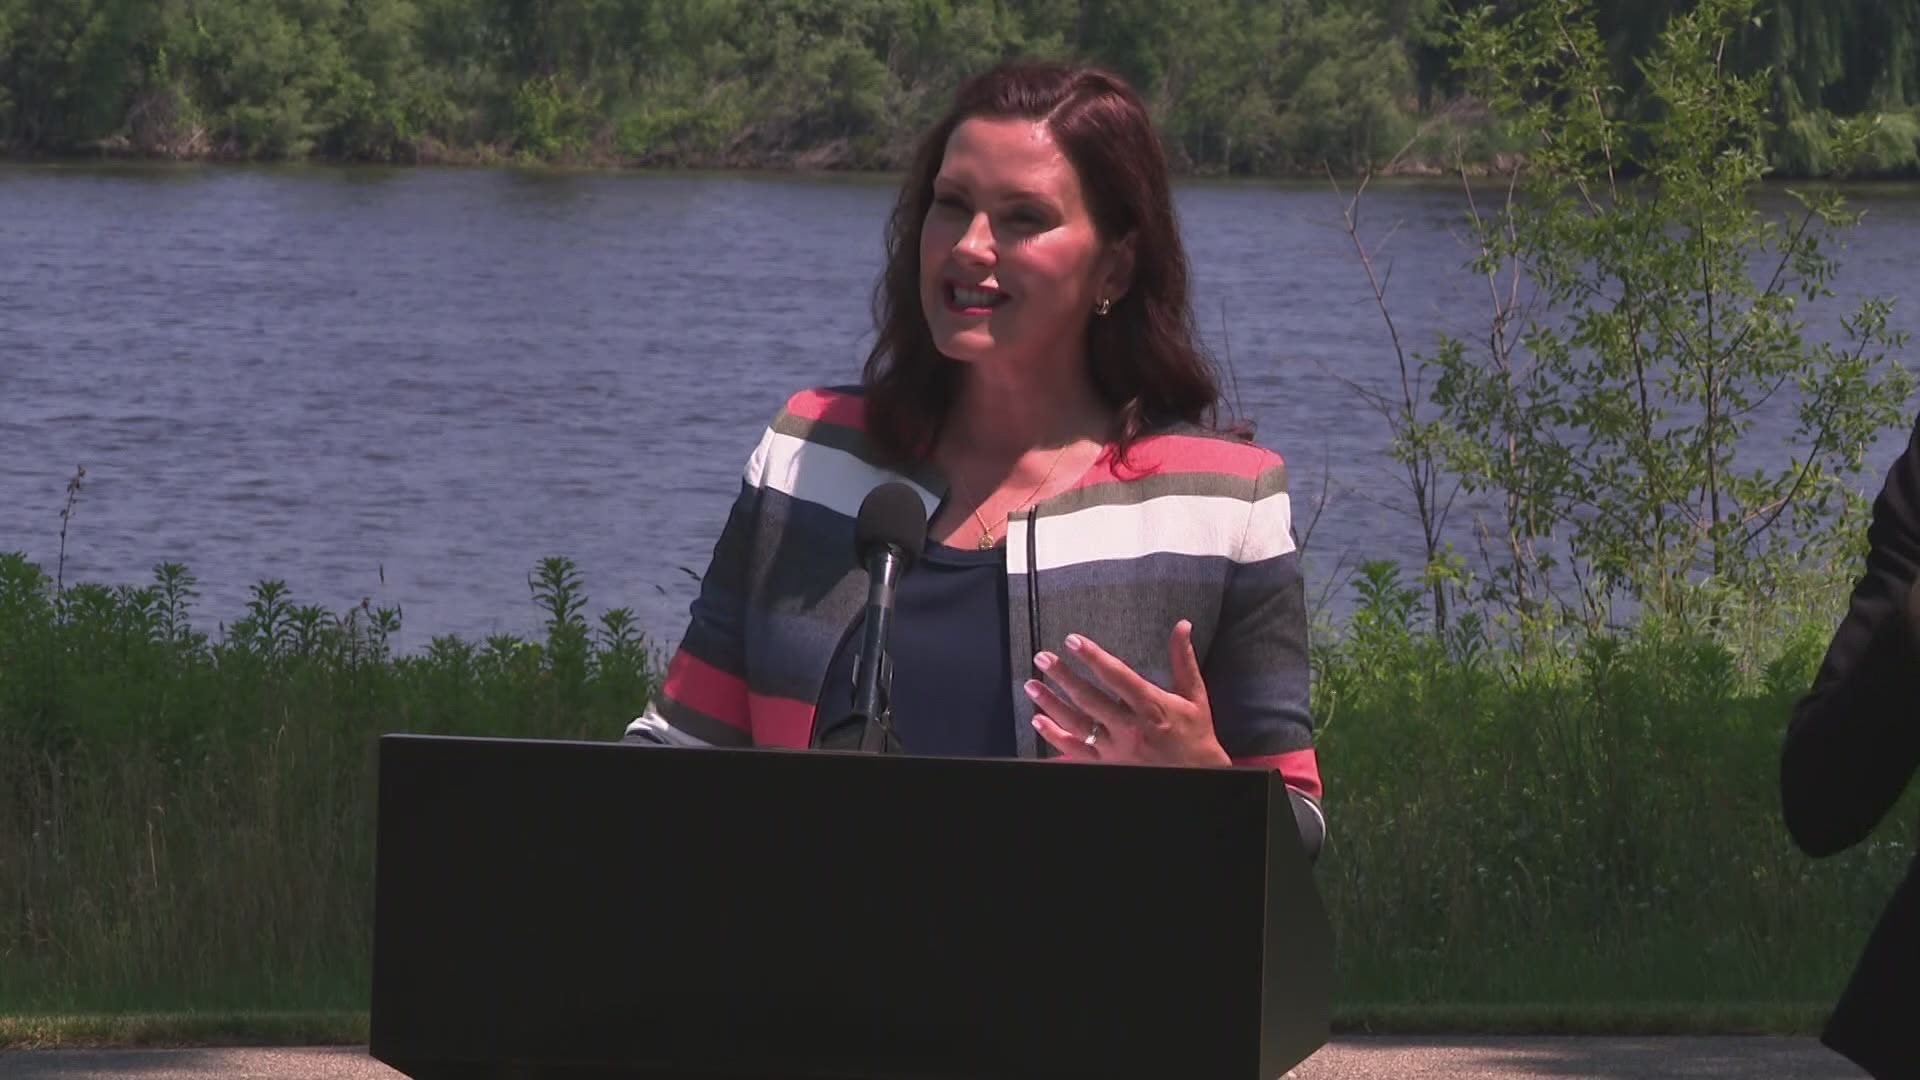 “These investments will ensure our children and grandchildren continue to enjoy the rejuvenating benefits of natural beauty and outdoor spaces..."